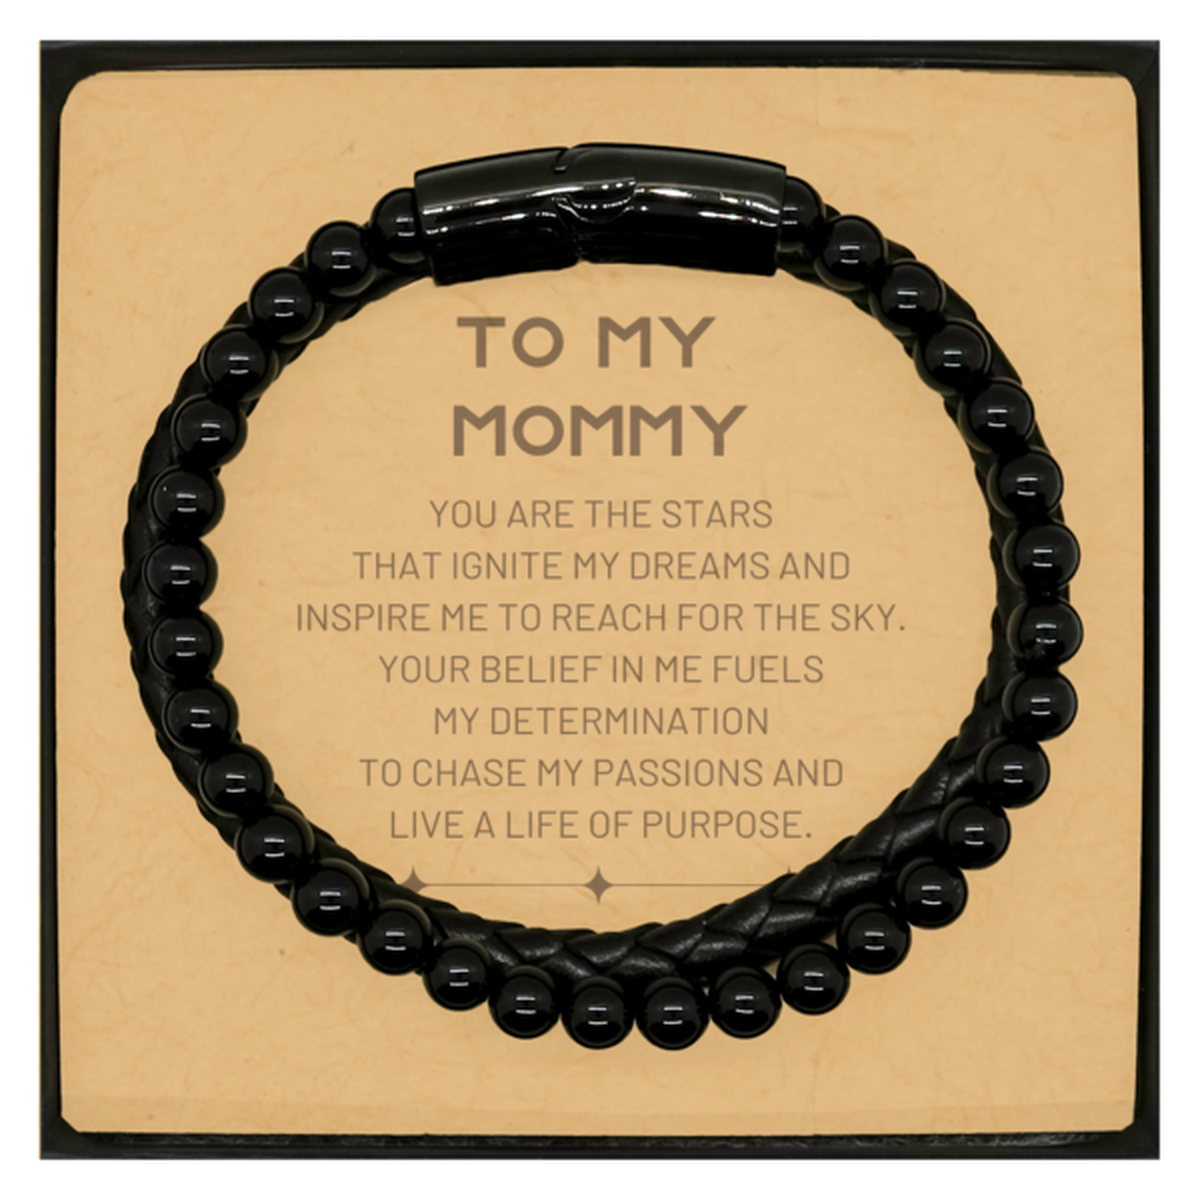 To My Mommy Stone Leather Bracelets, You are the stars that ignite my dreams and inspire me to reach for the sky, Birthday Christmas Unique Gifts For Mommy, Thank You Gifts For Mommy